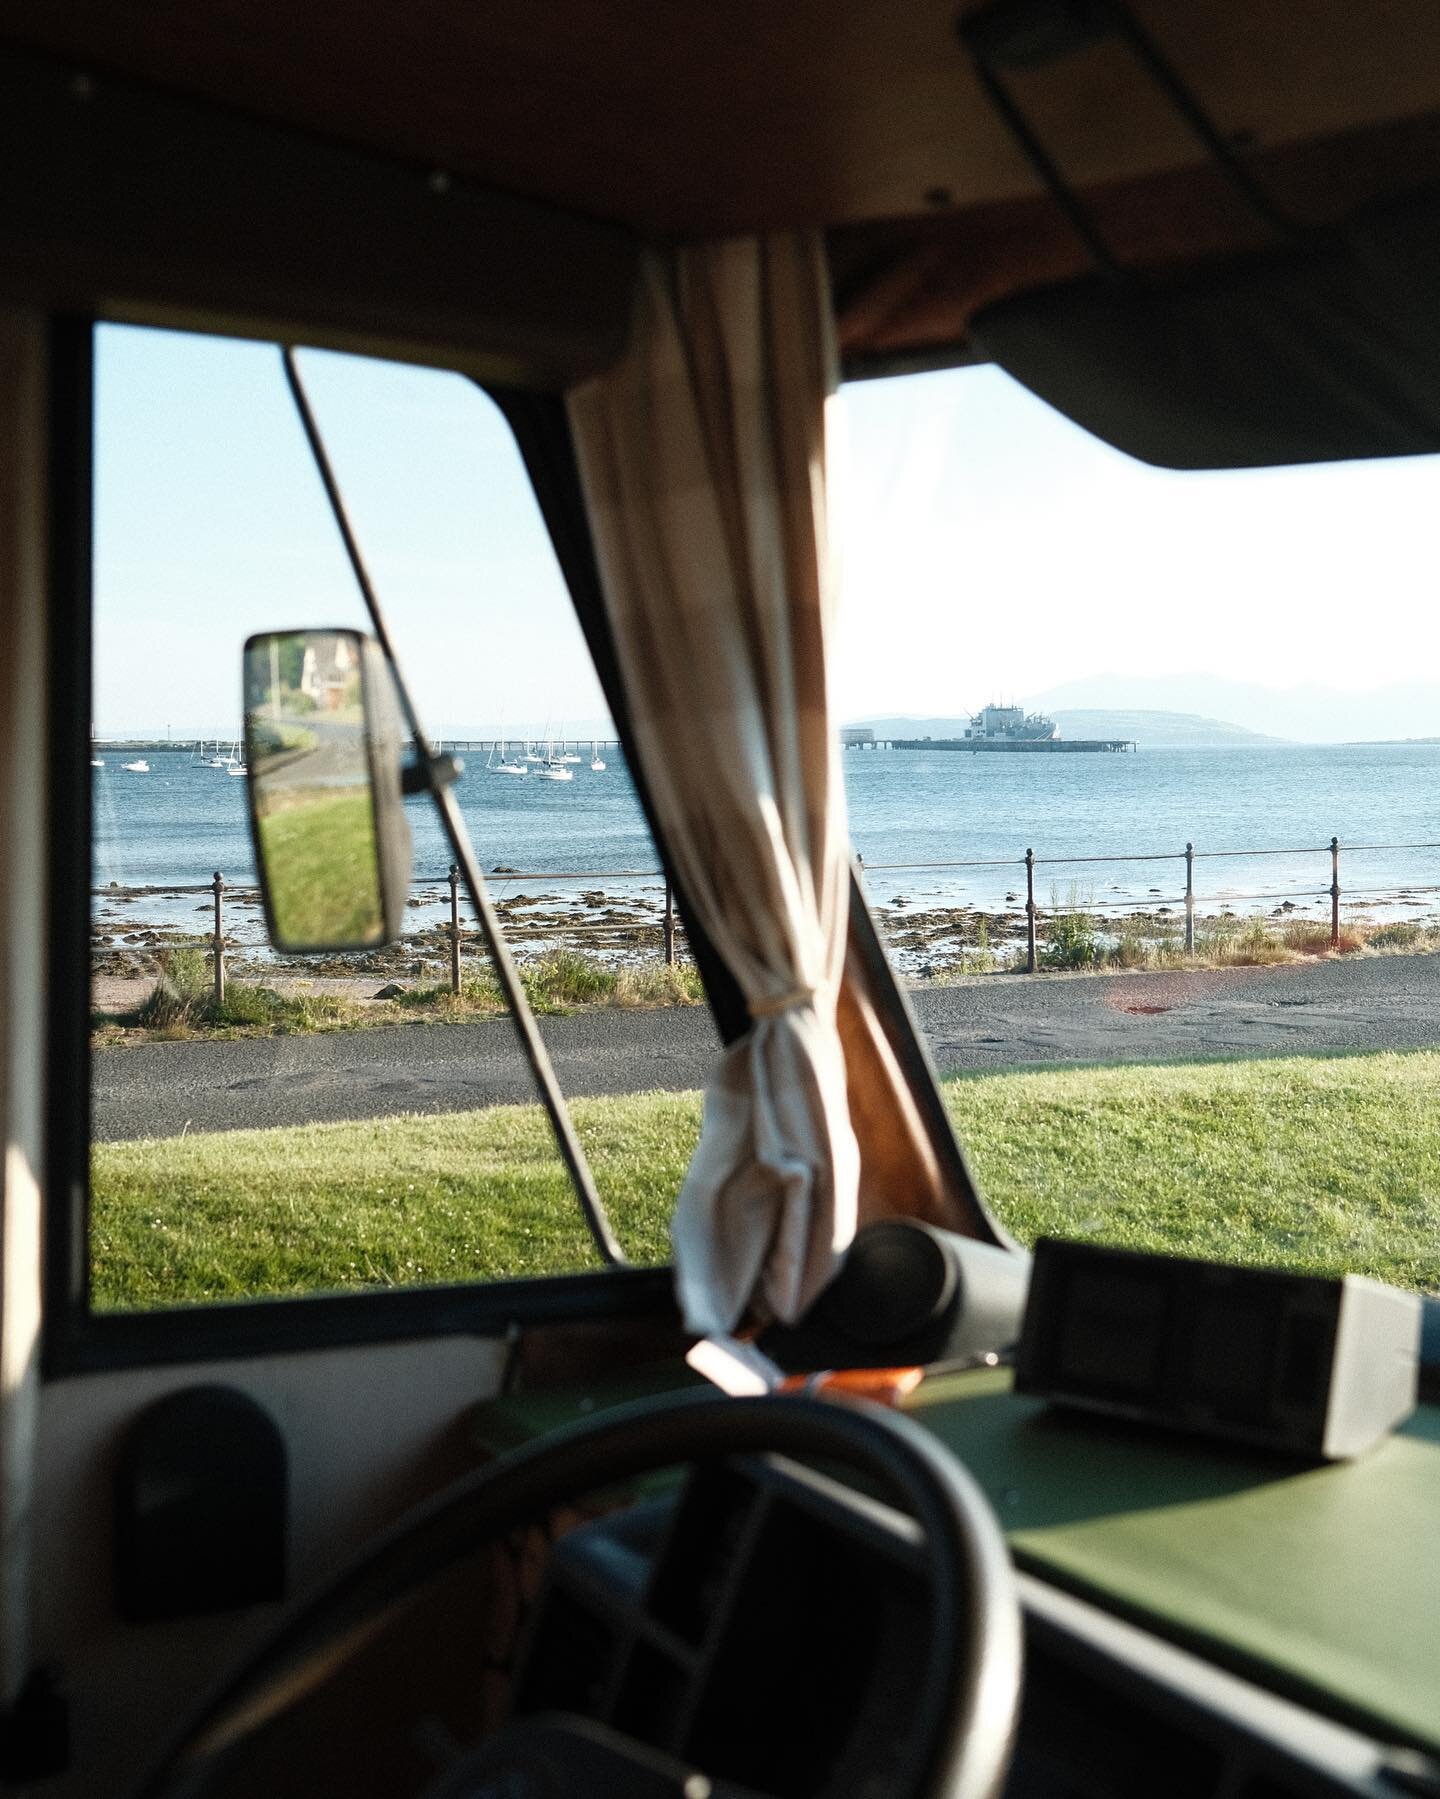 It&rsquo;s not quite ready for an overnight yet but we&rsquo;ve still been enjoying day trips and the novelty of eating dinner in the camper. And learning all of its quirks, of which there are many.